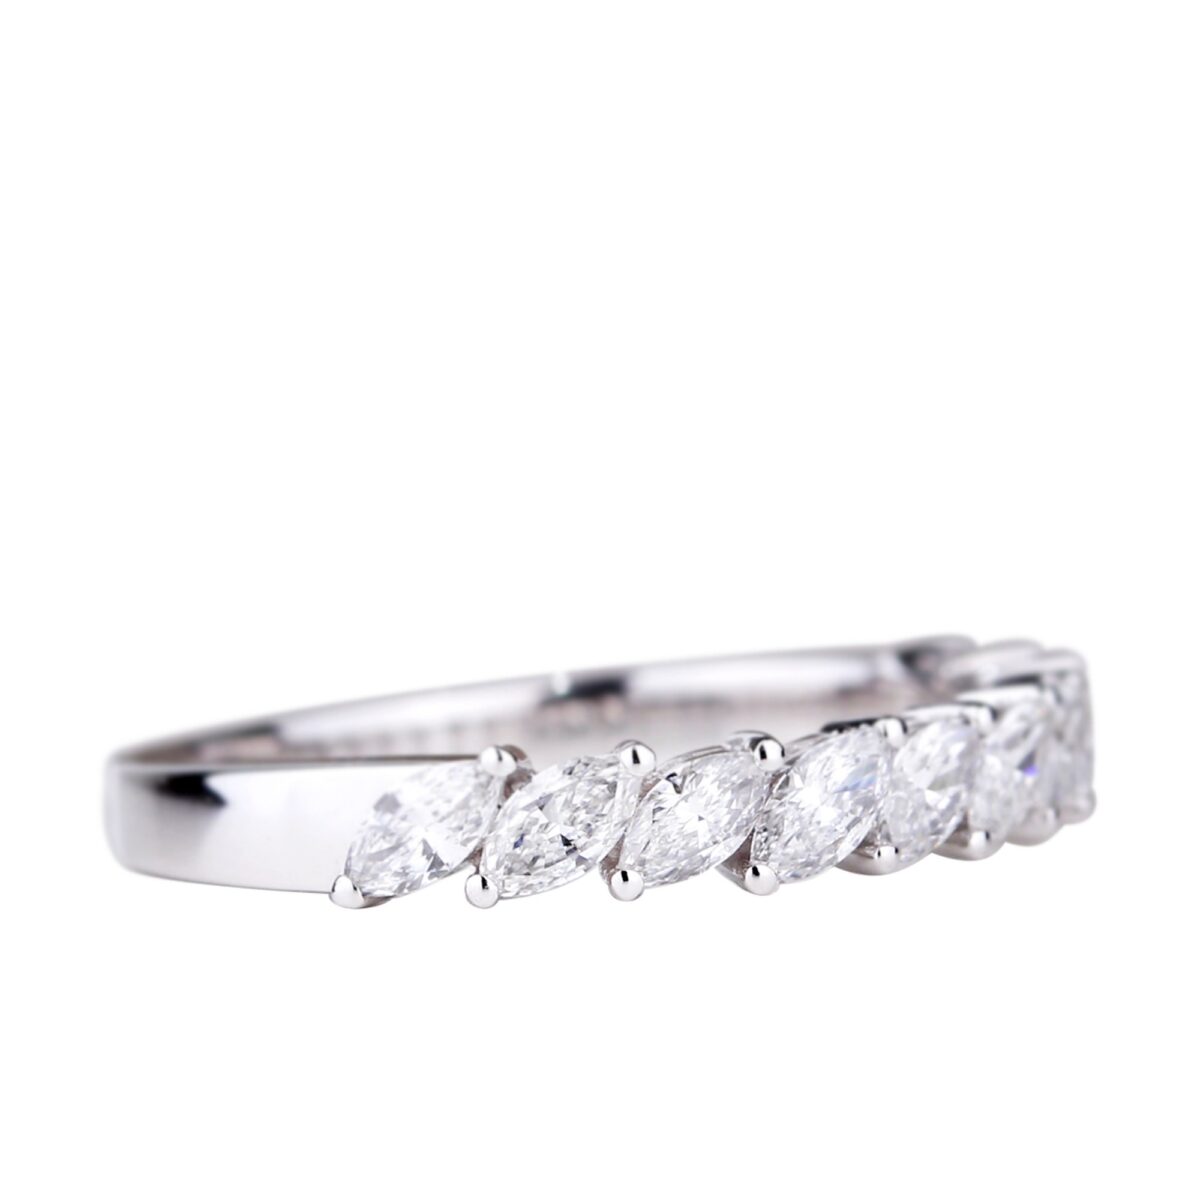 Alliance diamants taille marquise